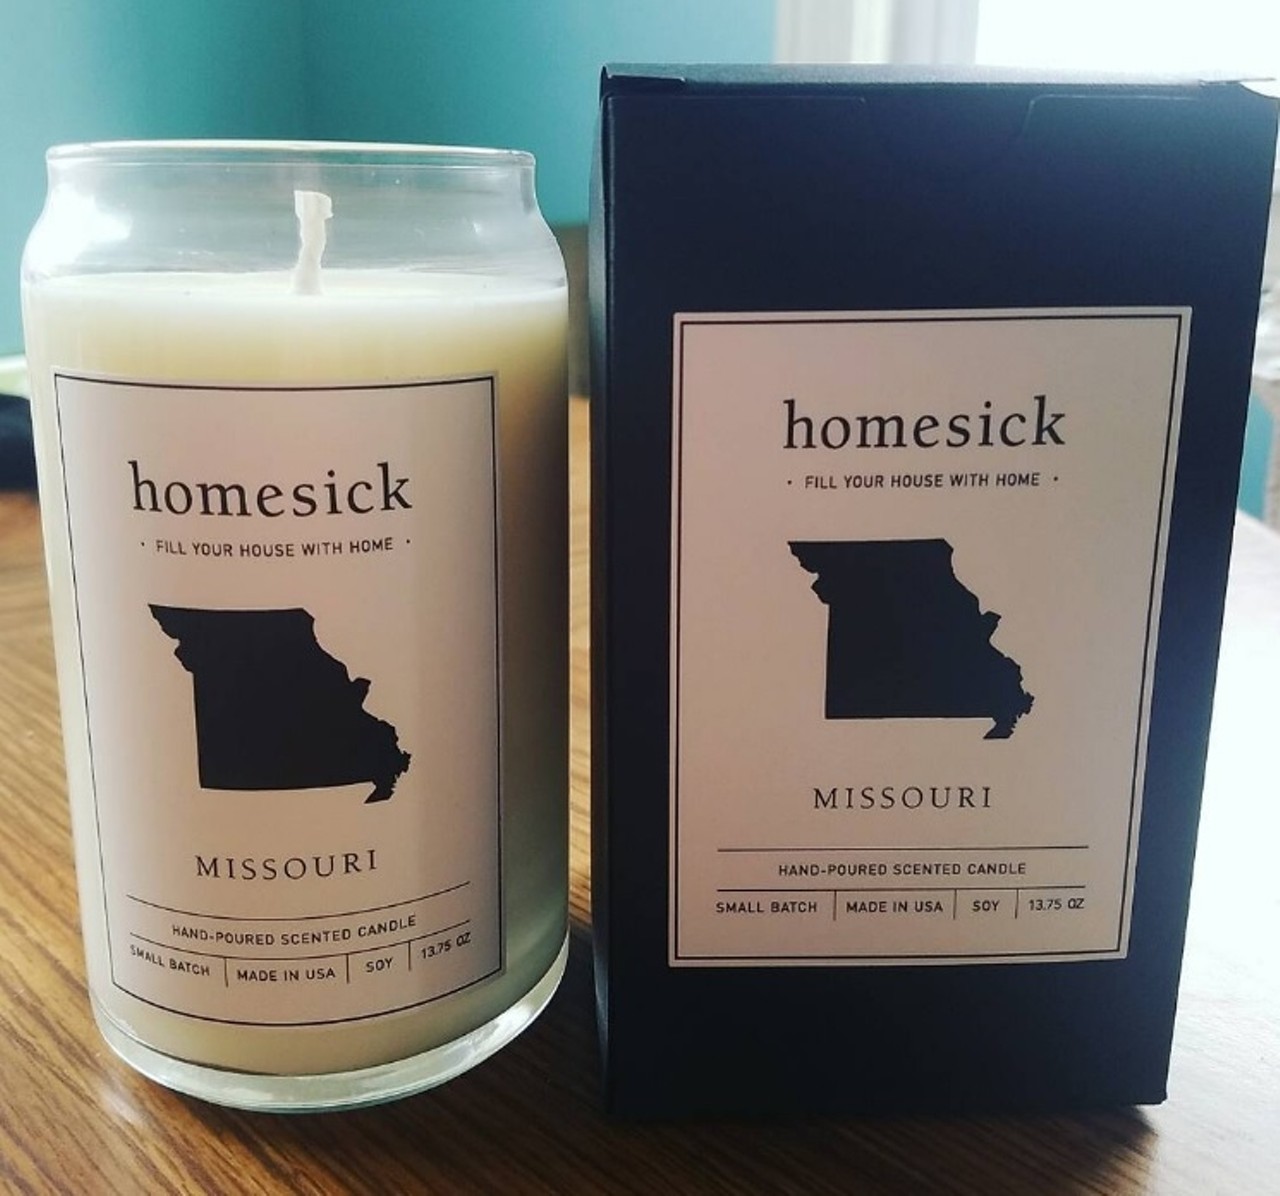 Homesick Candes
Perfect for the St. Louis ex-pat, this candle company makes candles that evoke every state. The Missouri candle "will take you back to the good ol' days in the Show Me State with hints of running river water and white hawthorne and dogwood blossoms." Christmas delivery isn't guaranteed on all new orders at this point, but the perfect gift is worth the wait, right? Photo courtesy of Instagram / christynamills.